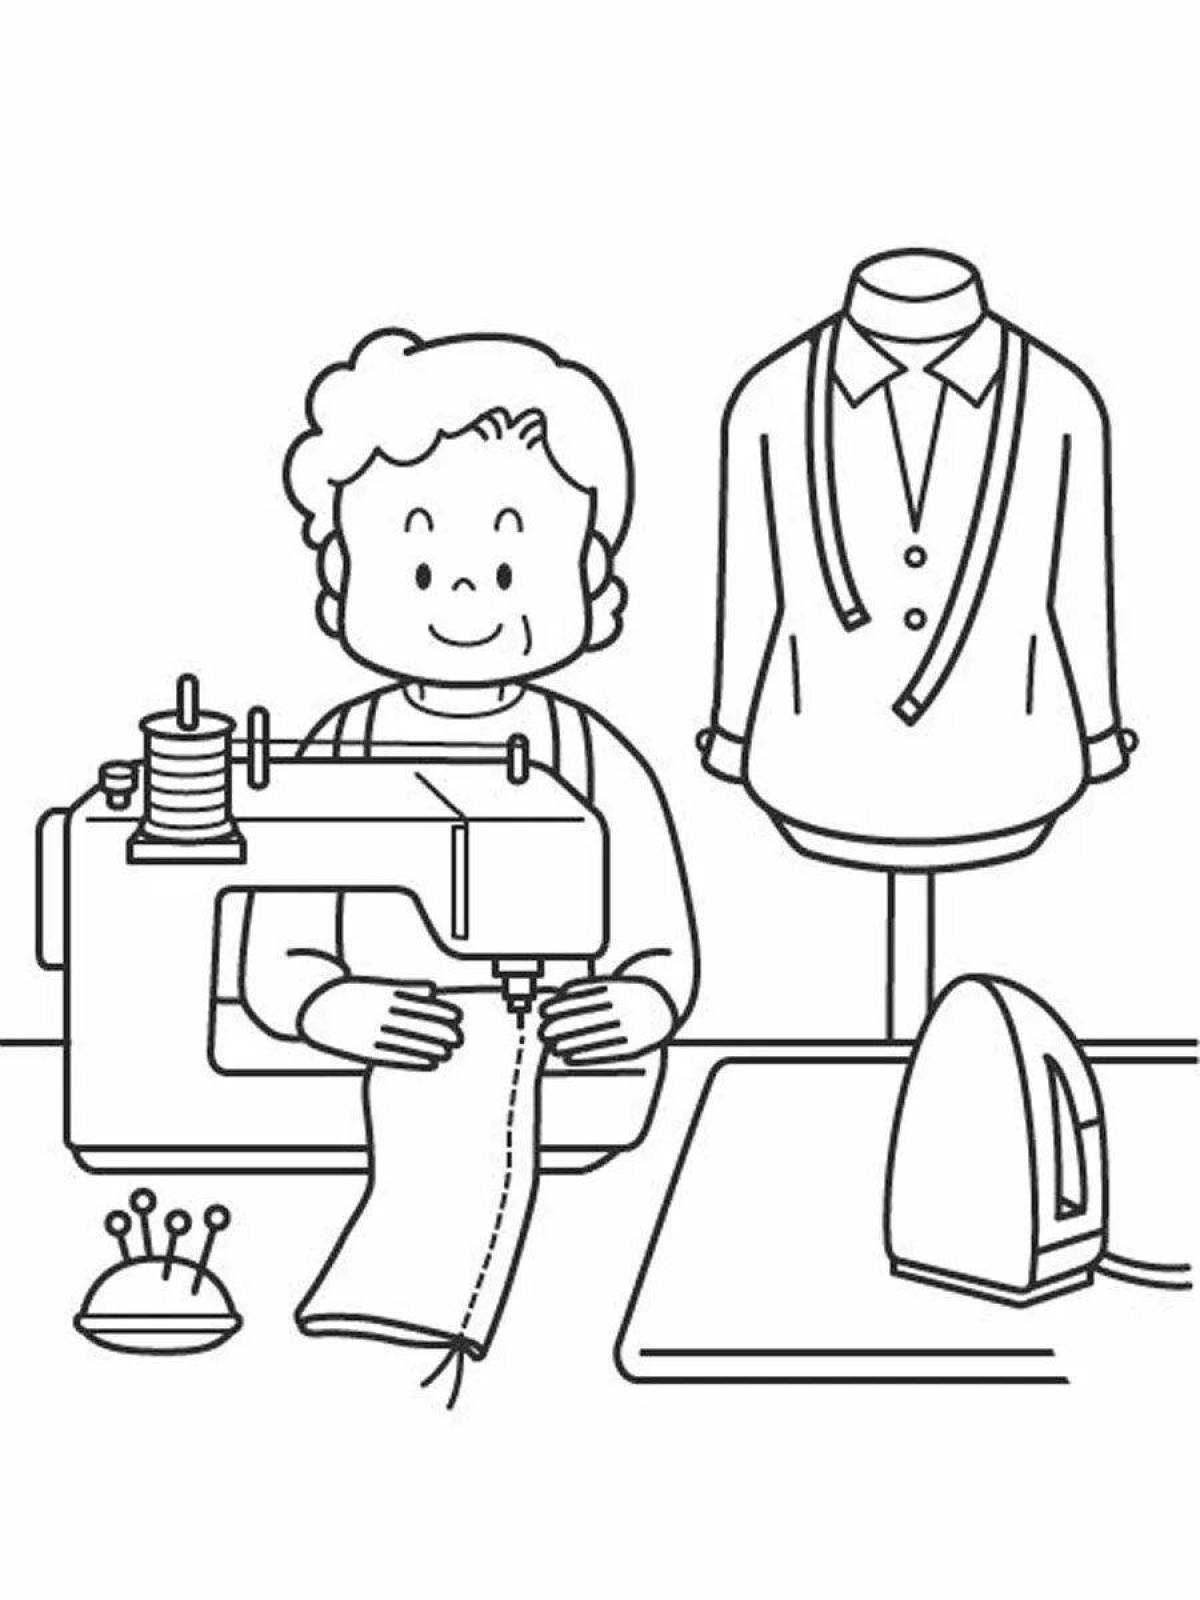 Glowing Seamstress Coloring Page for Toddlers